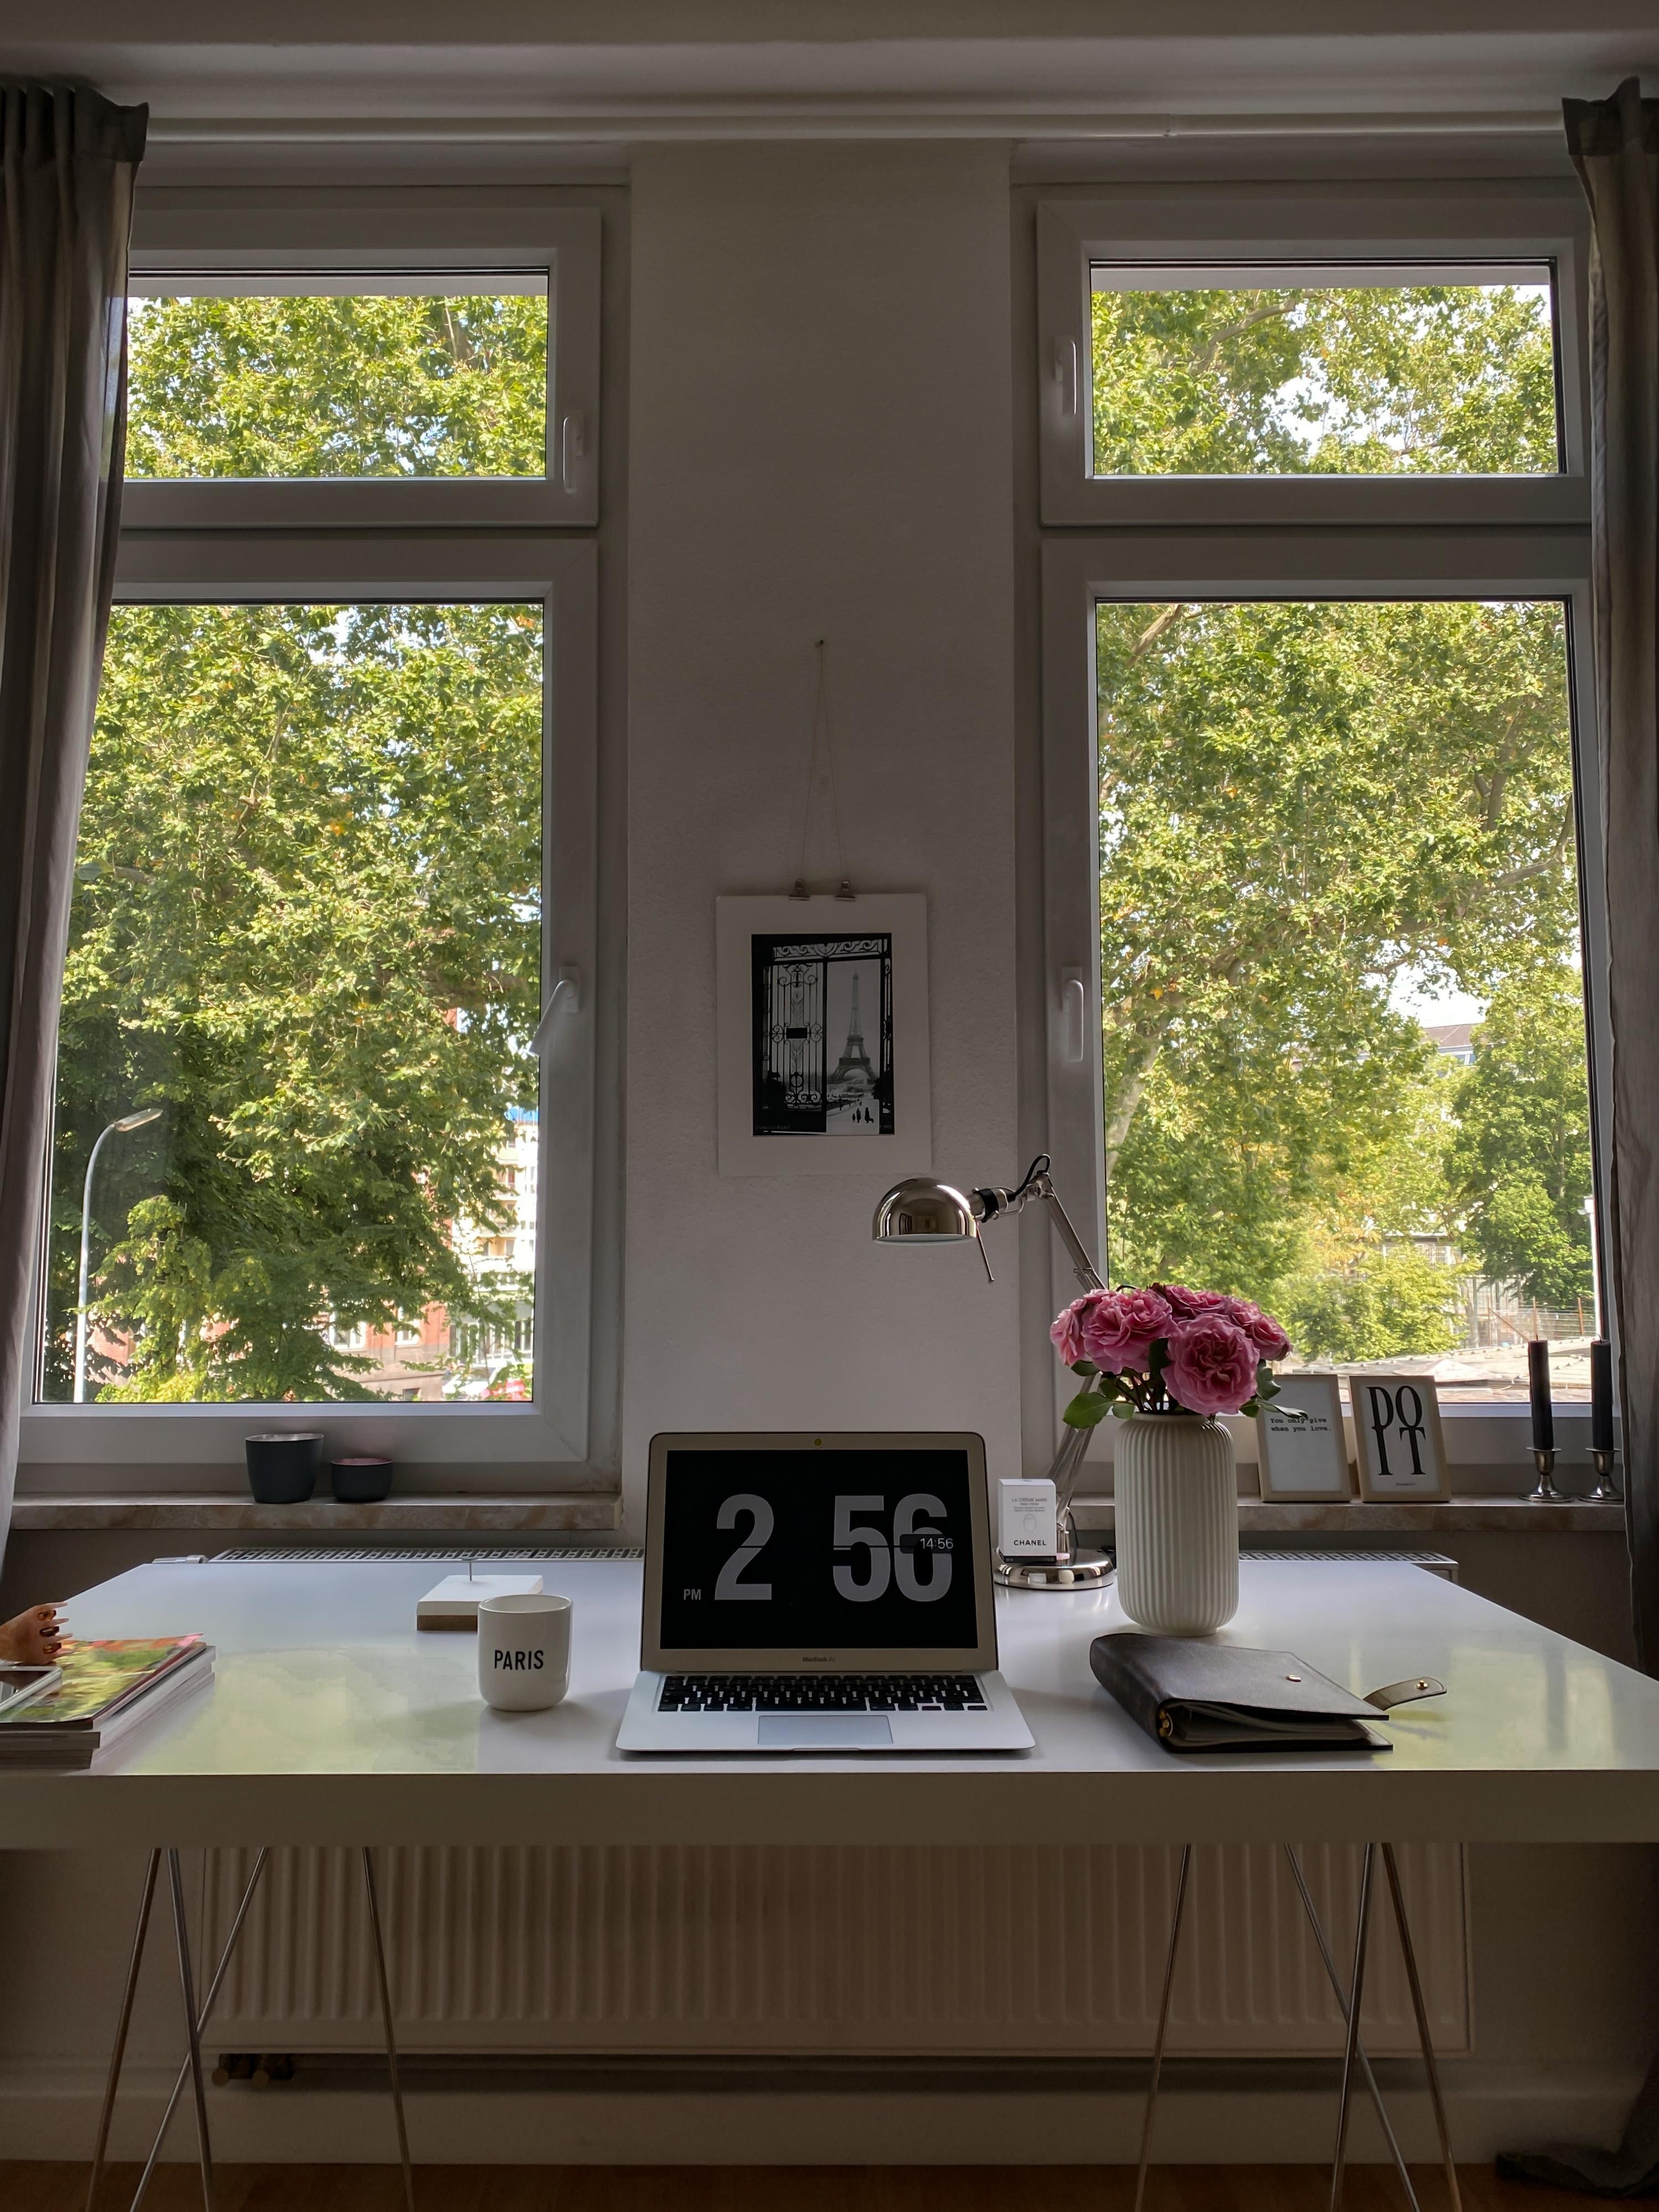 #homeoffice with a view:) 

#living #homestories #homestory #selbstständig #daydreaming #homeandliving